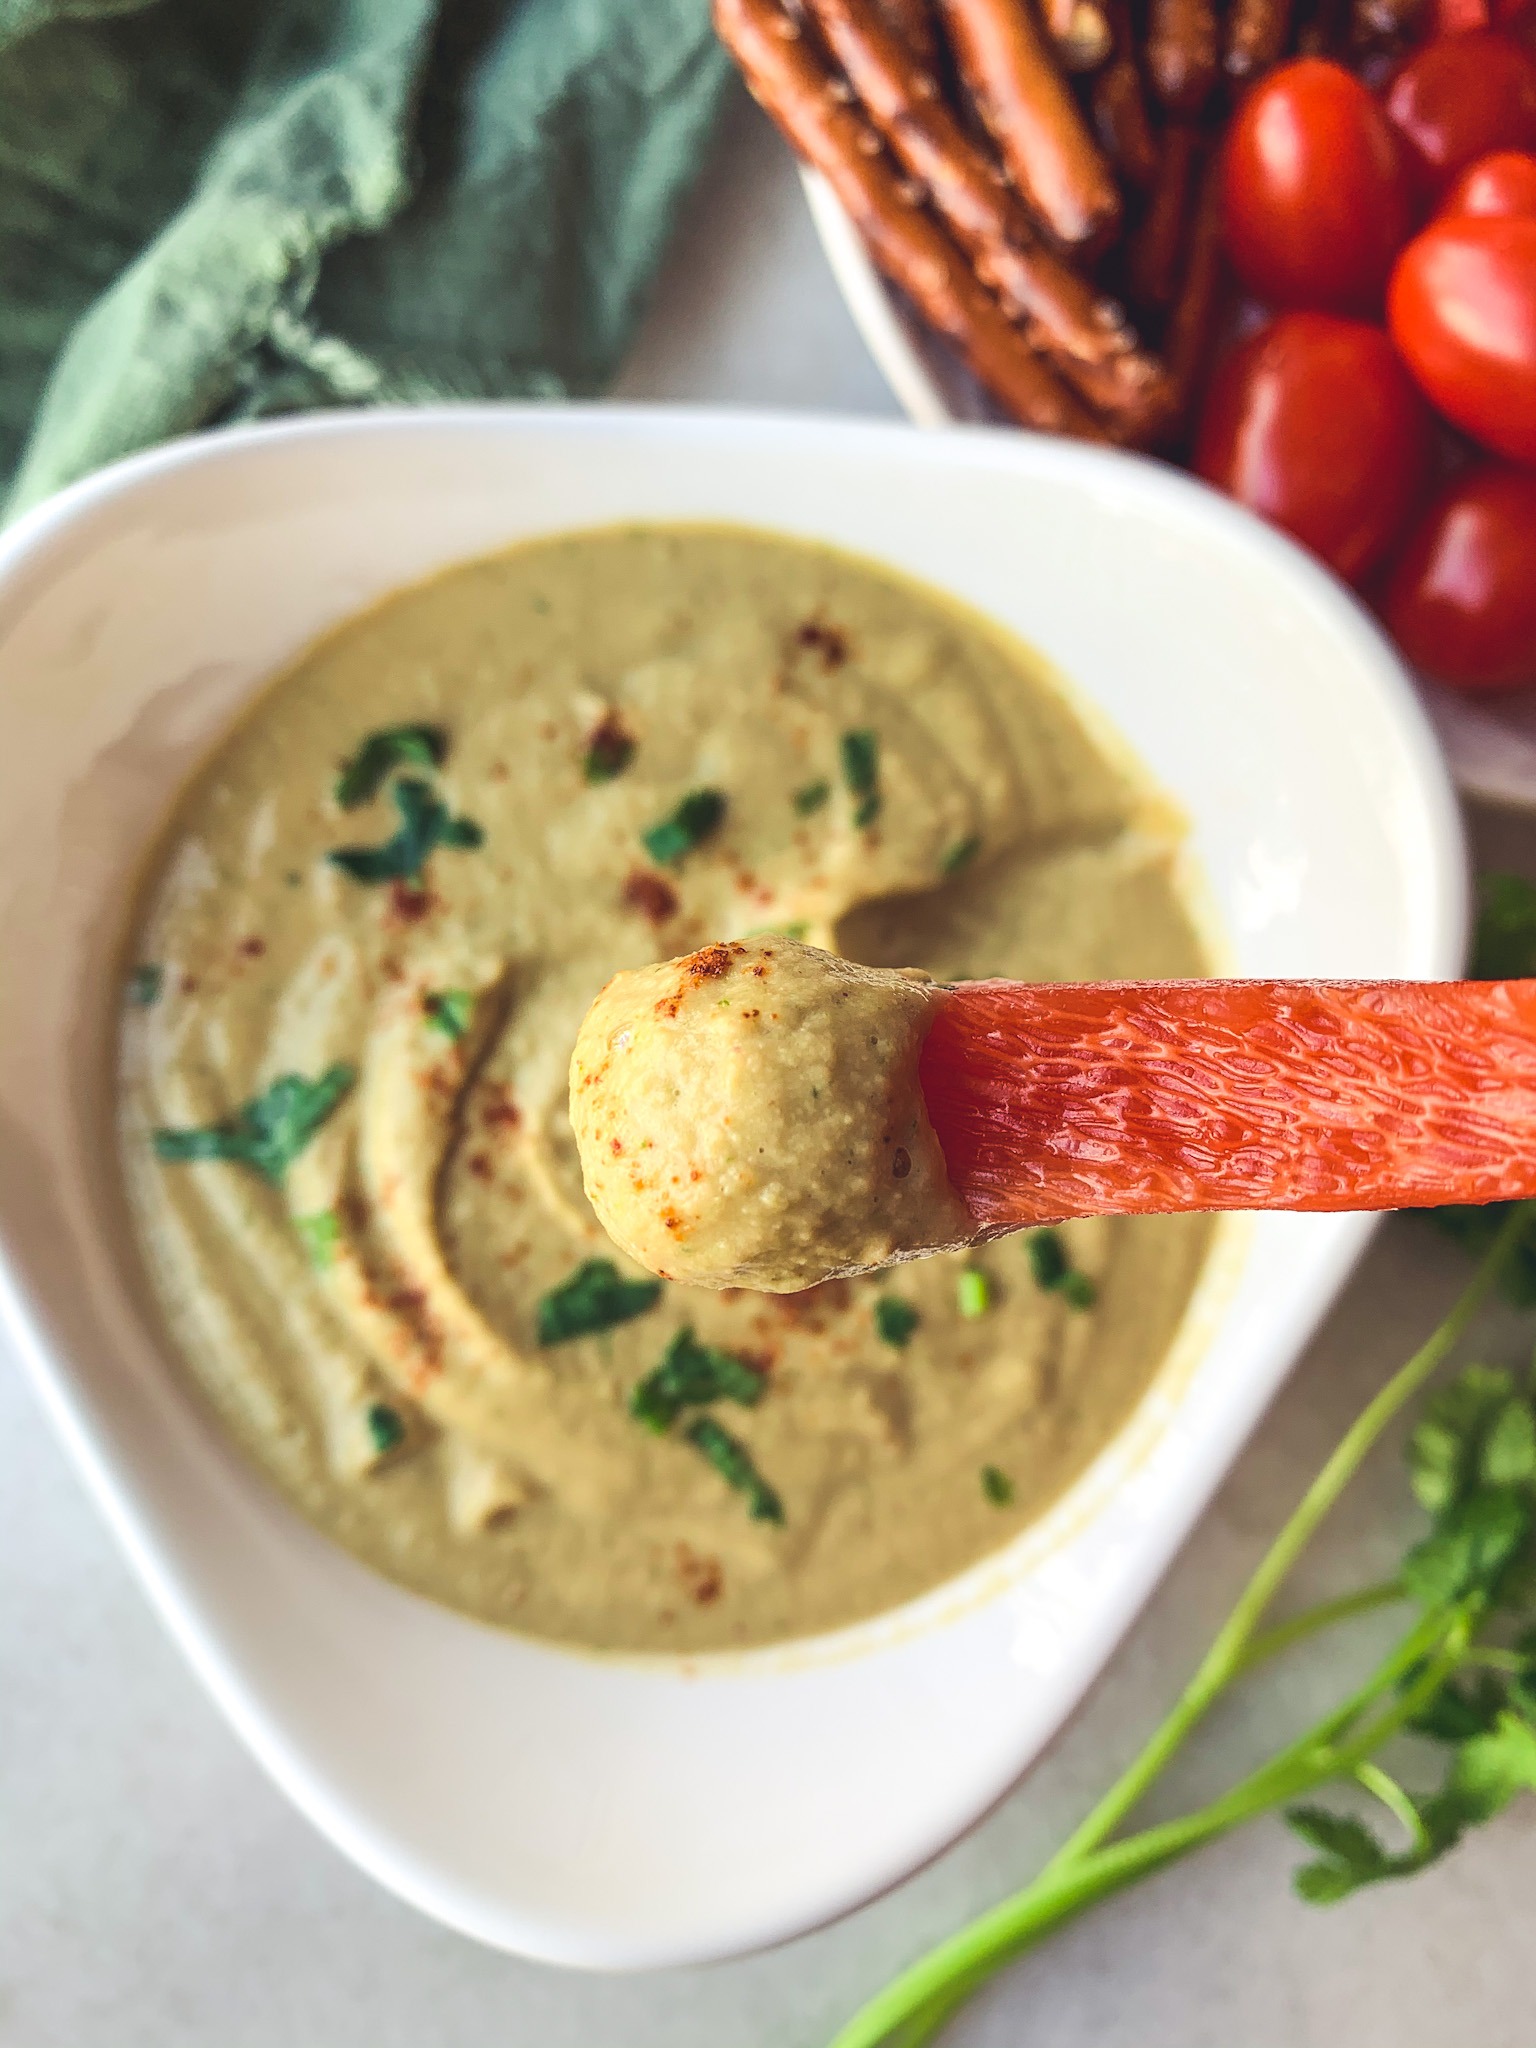 Close-up shot of a red pepper dipped into creamy peanut cilantro hummus with a cayenne garnish.